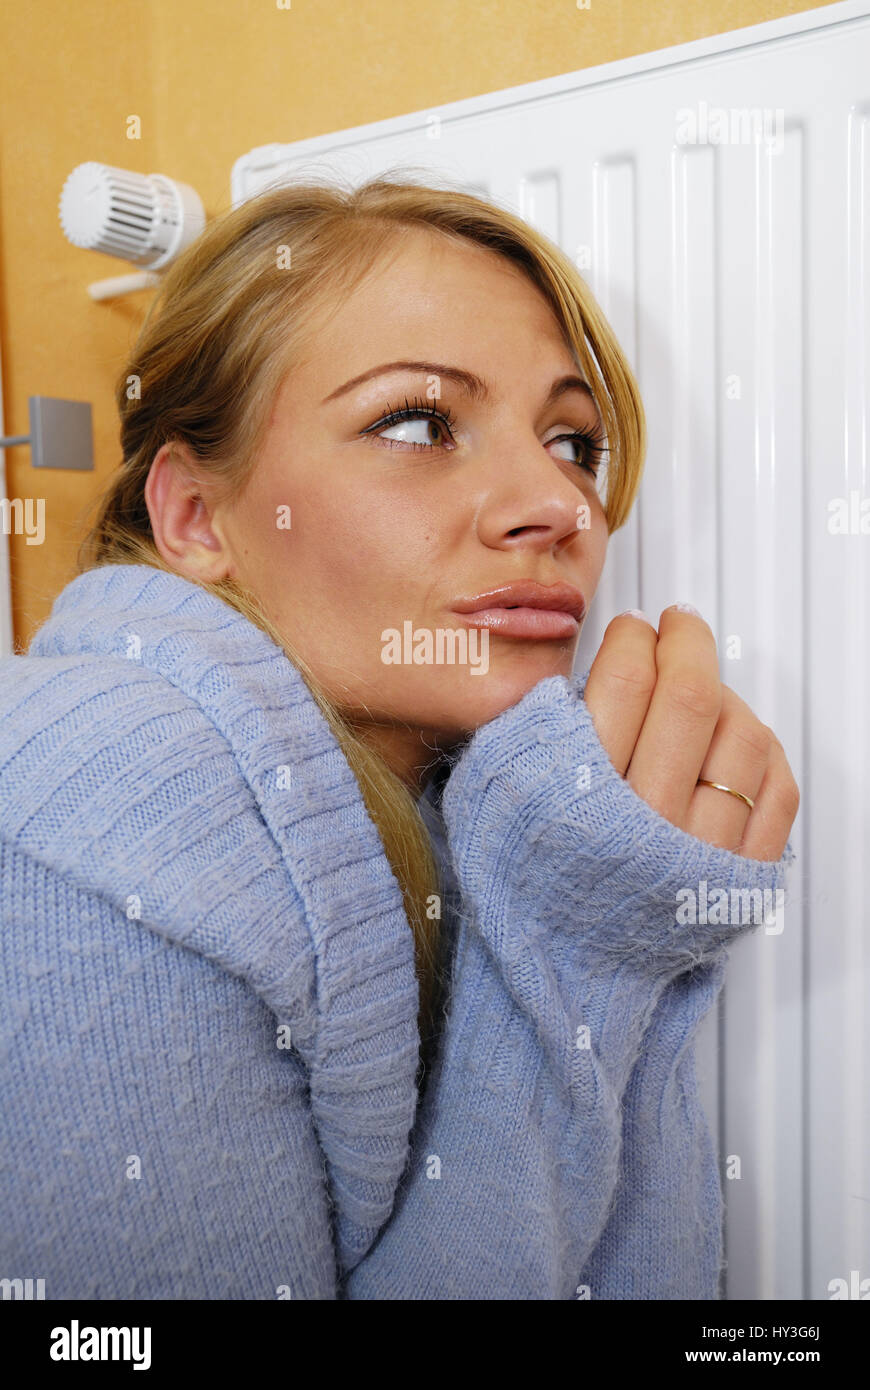 Young woman sits freezing before the heating, Junge Frau sitzt frierend vor der Heizung Stock Photo